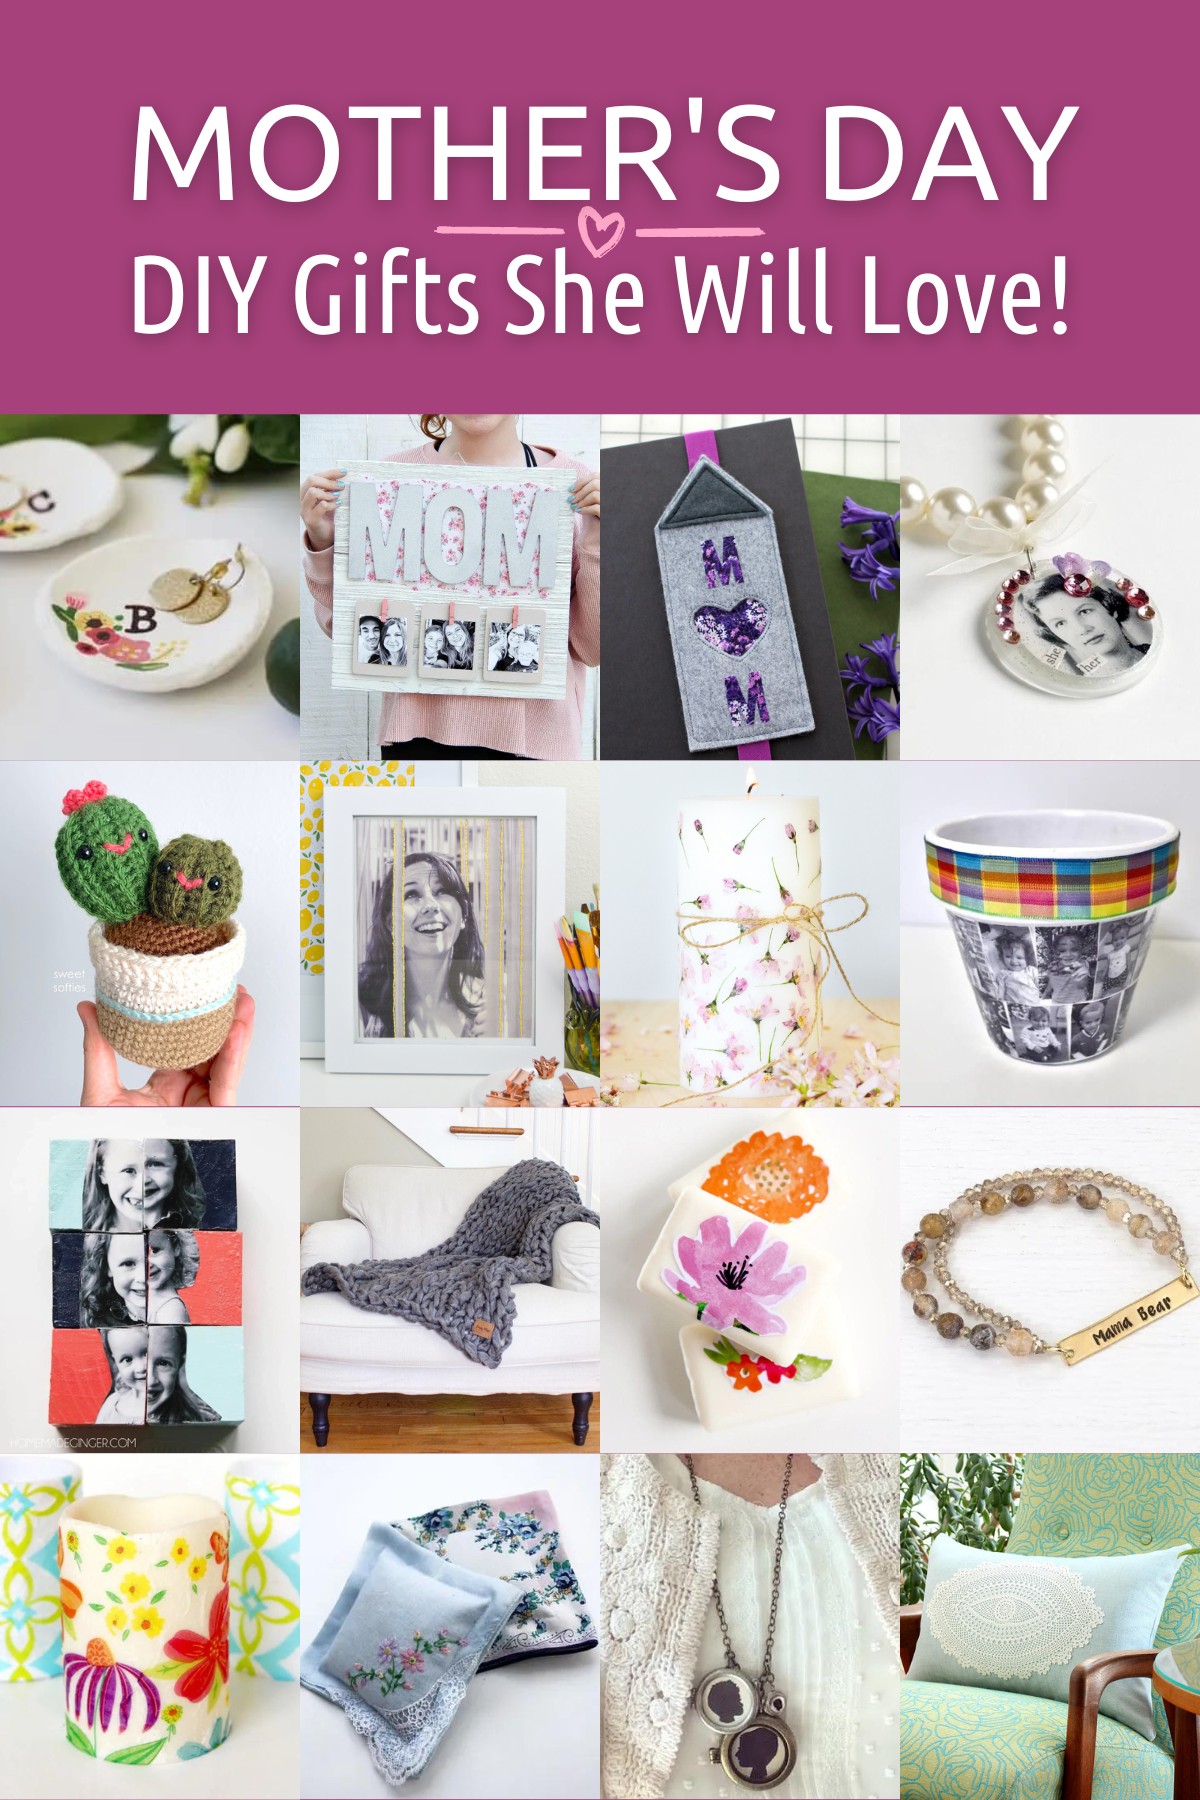 DIY Mother's Day gifts she will love